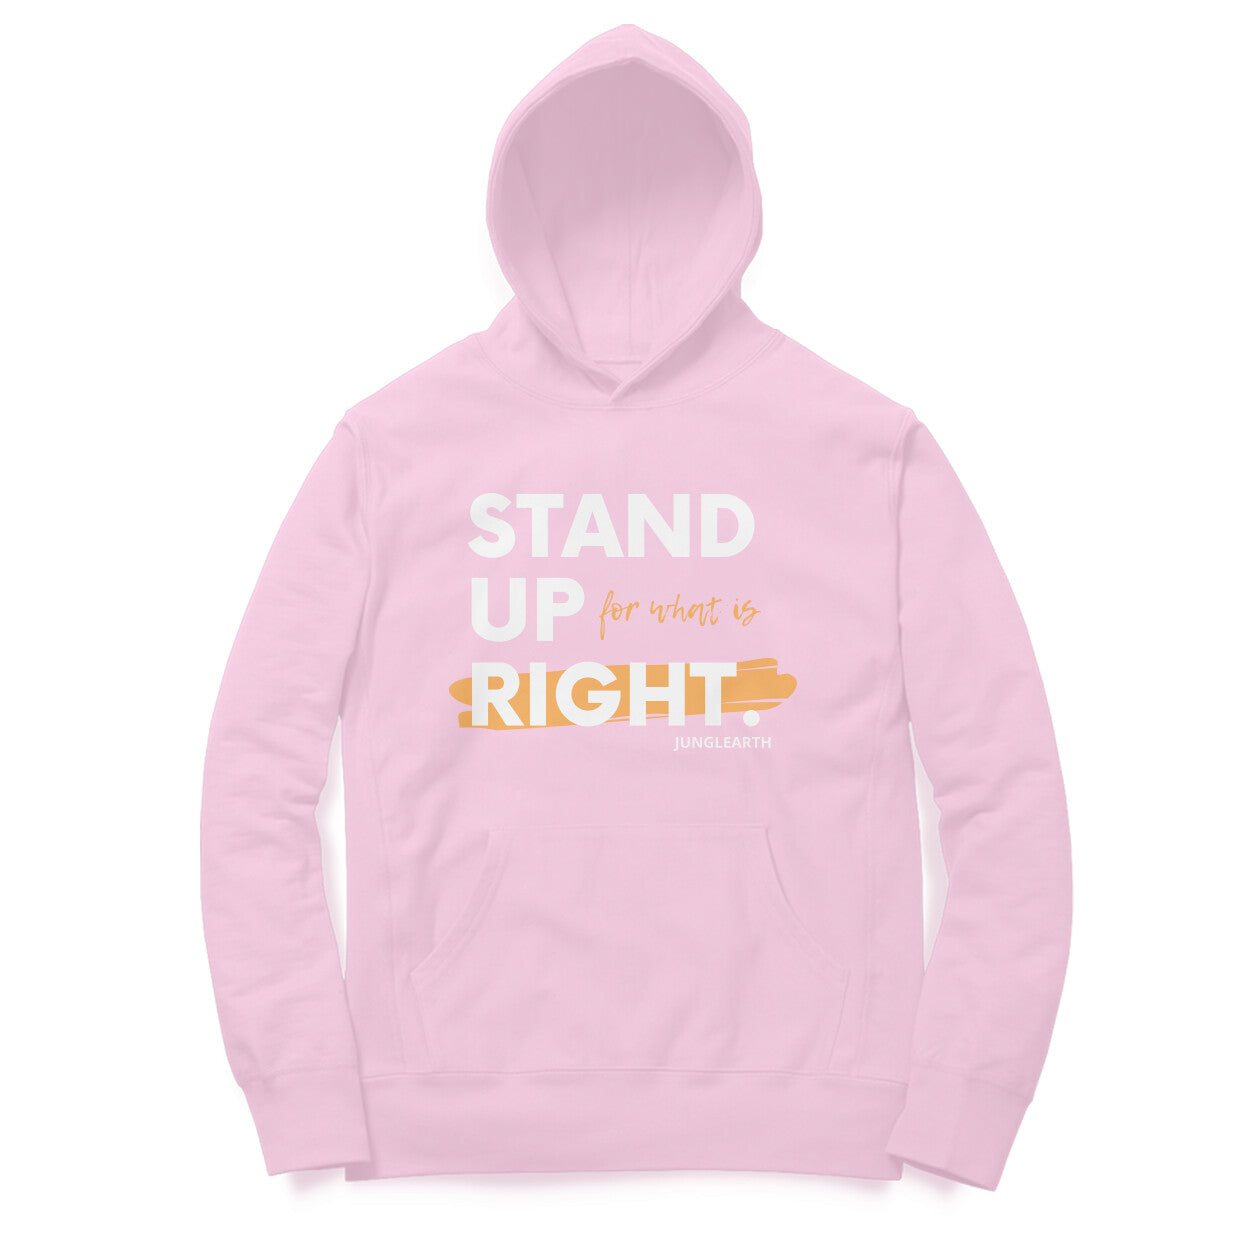 junglearth rights Hoodie